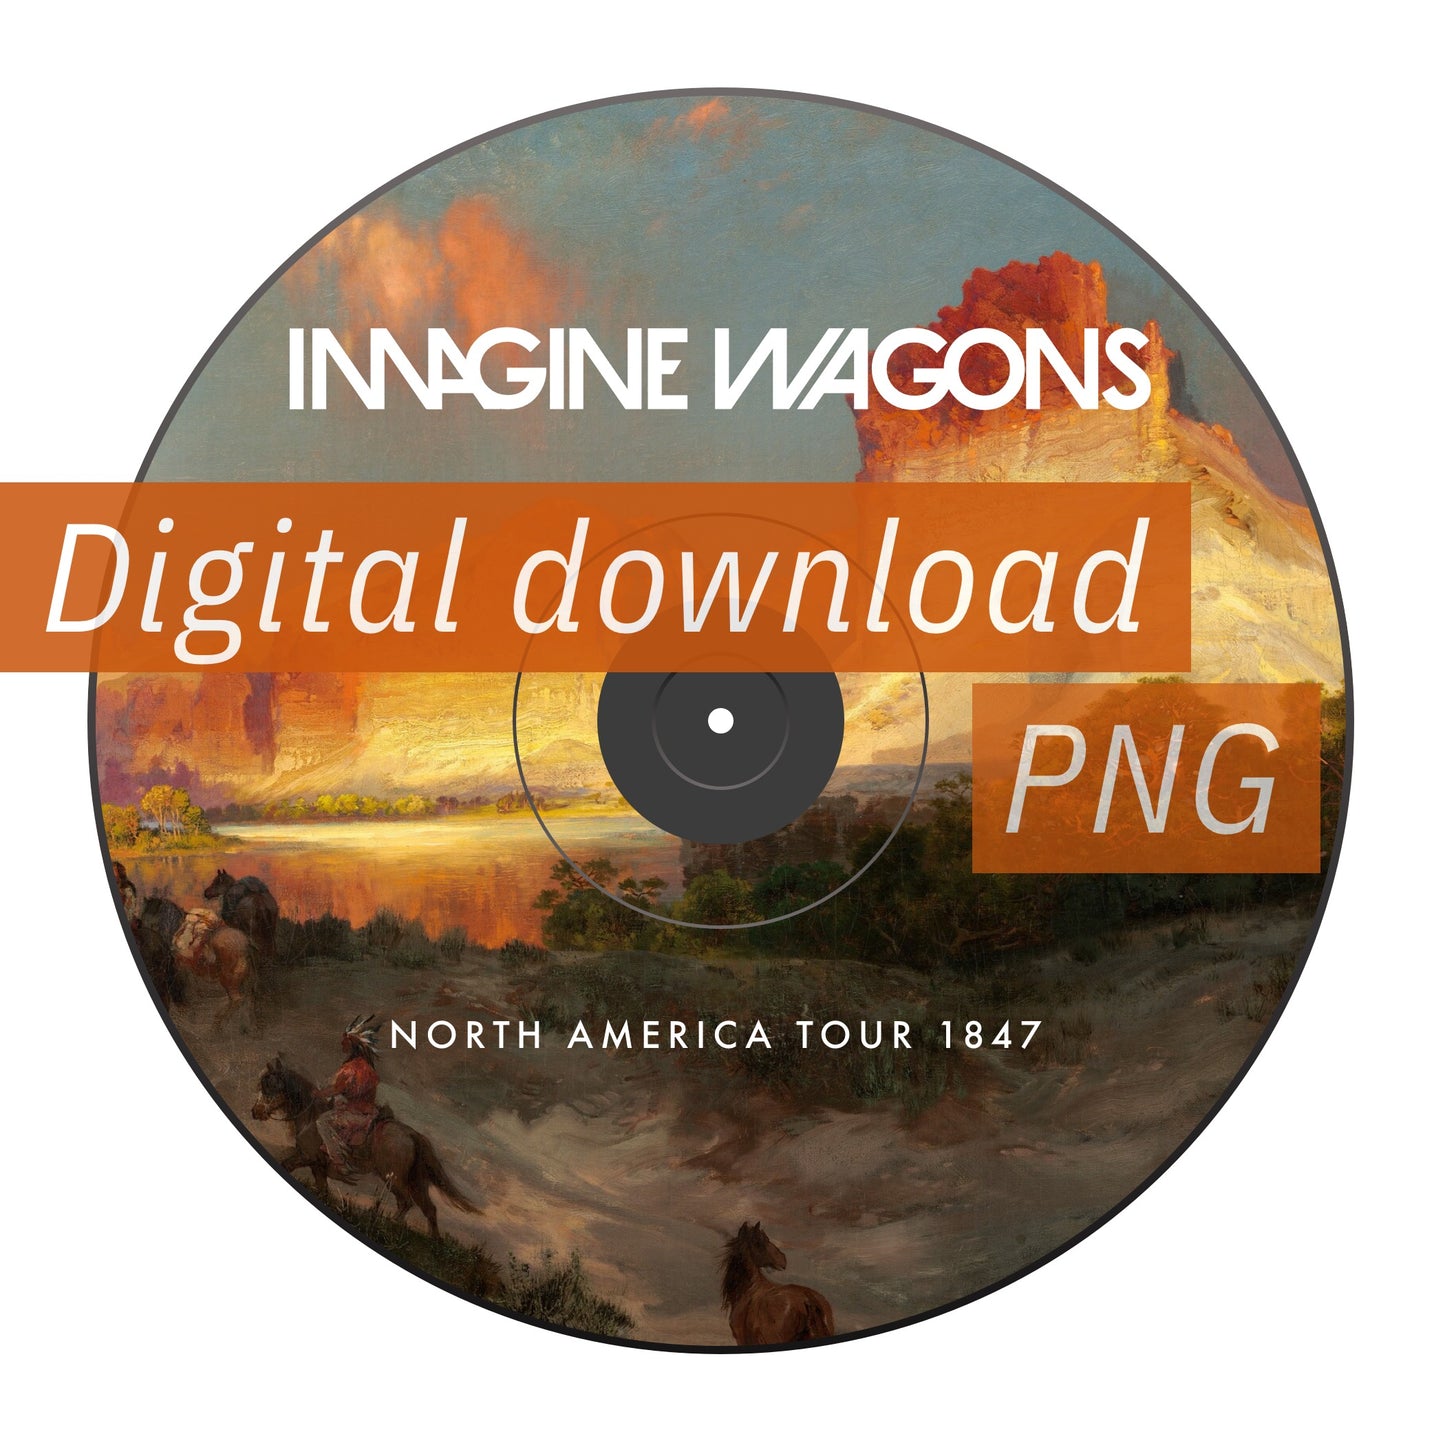 Imagine Wagons - Digital Download Only